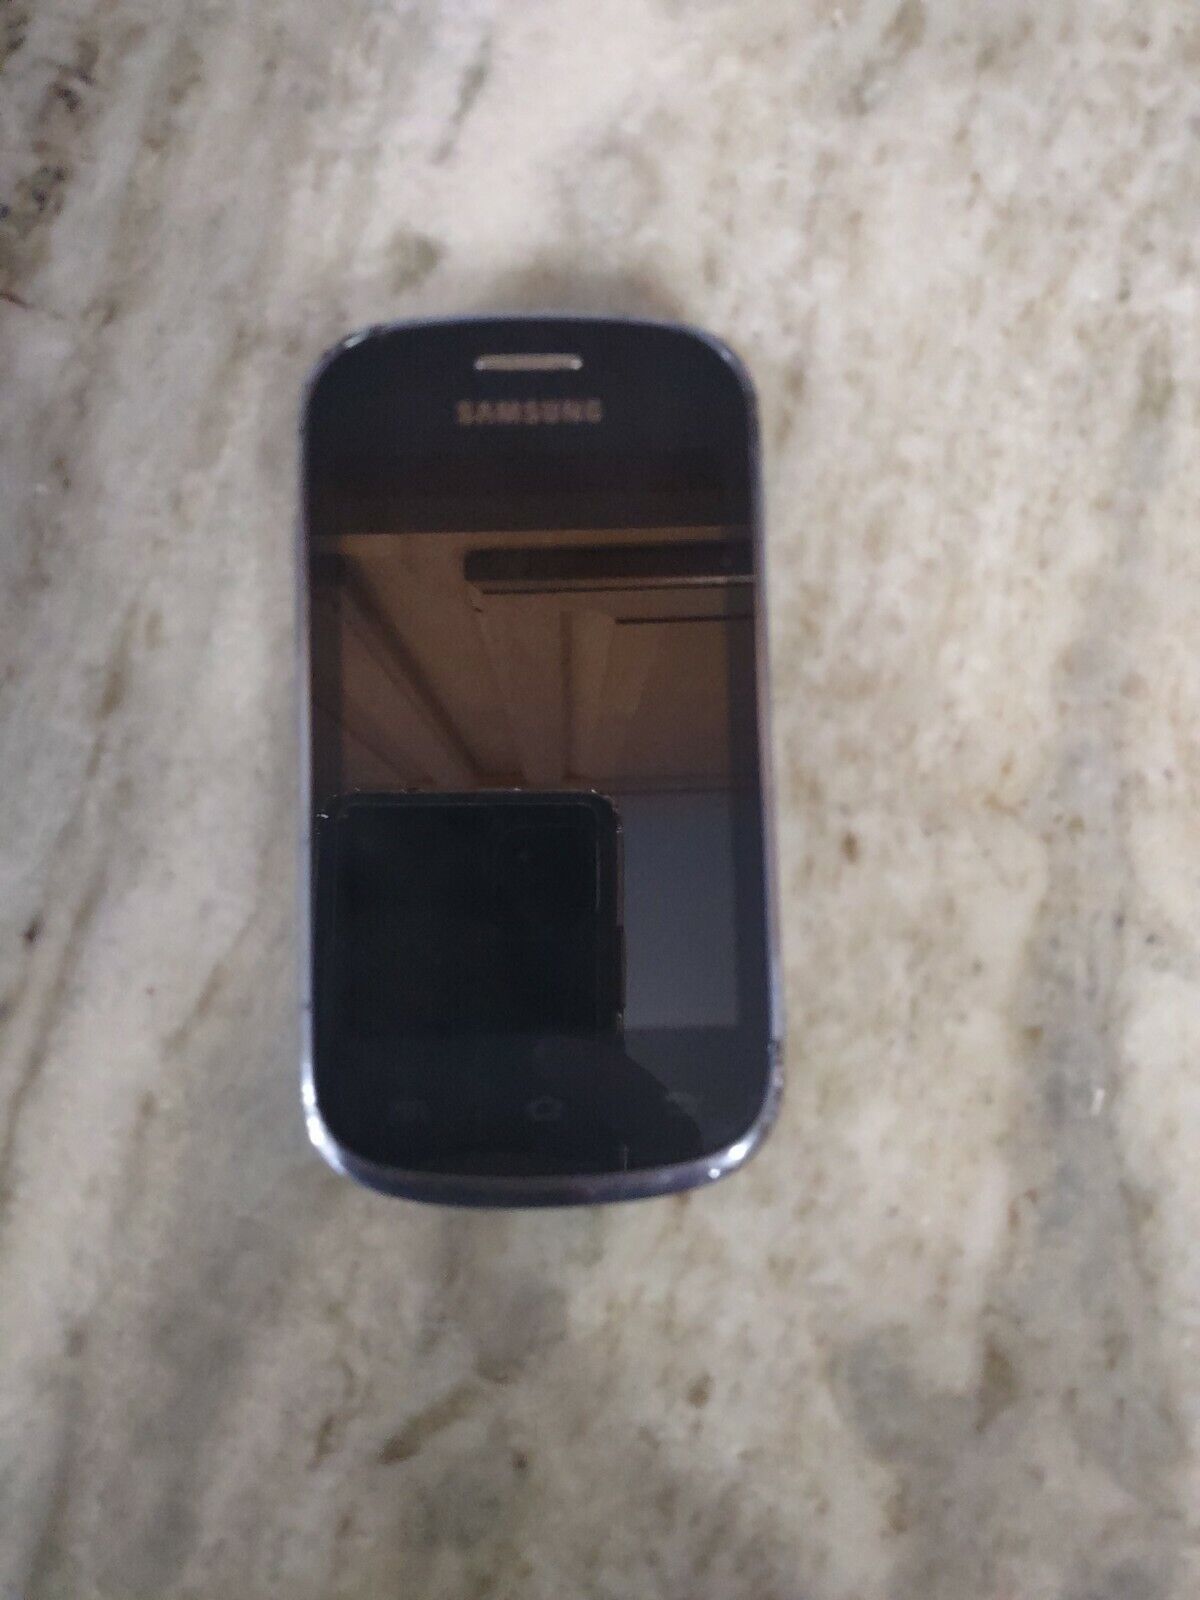 Primary image for Samsung Cricket Phone